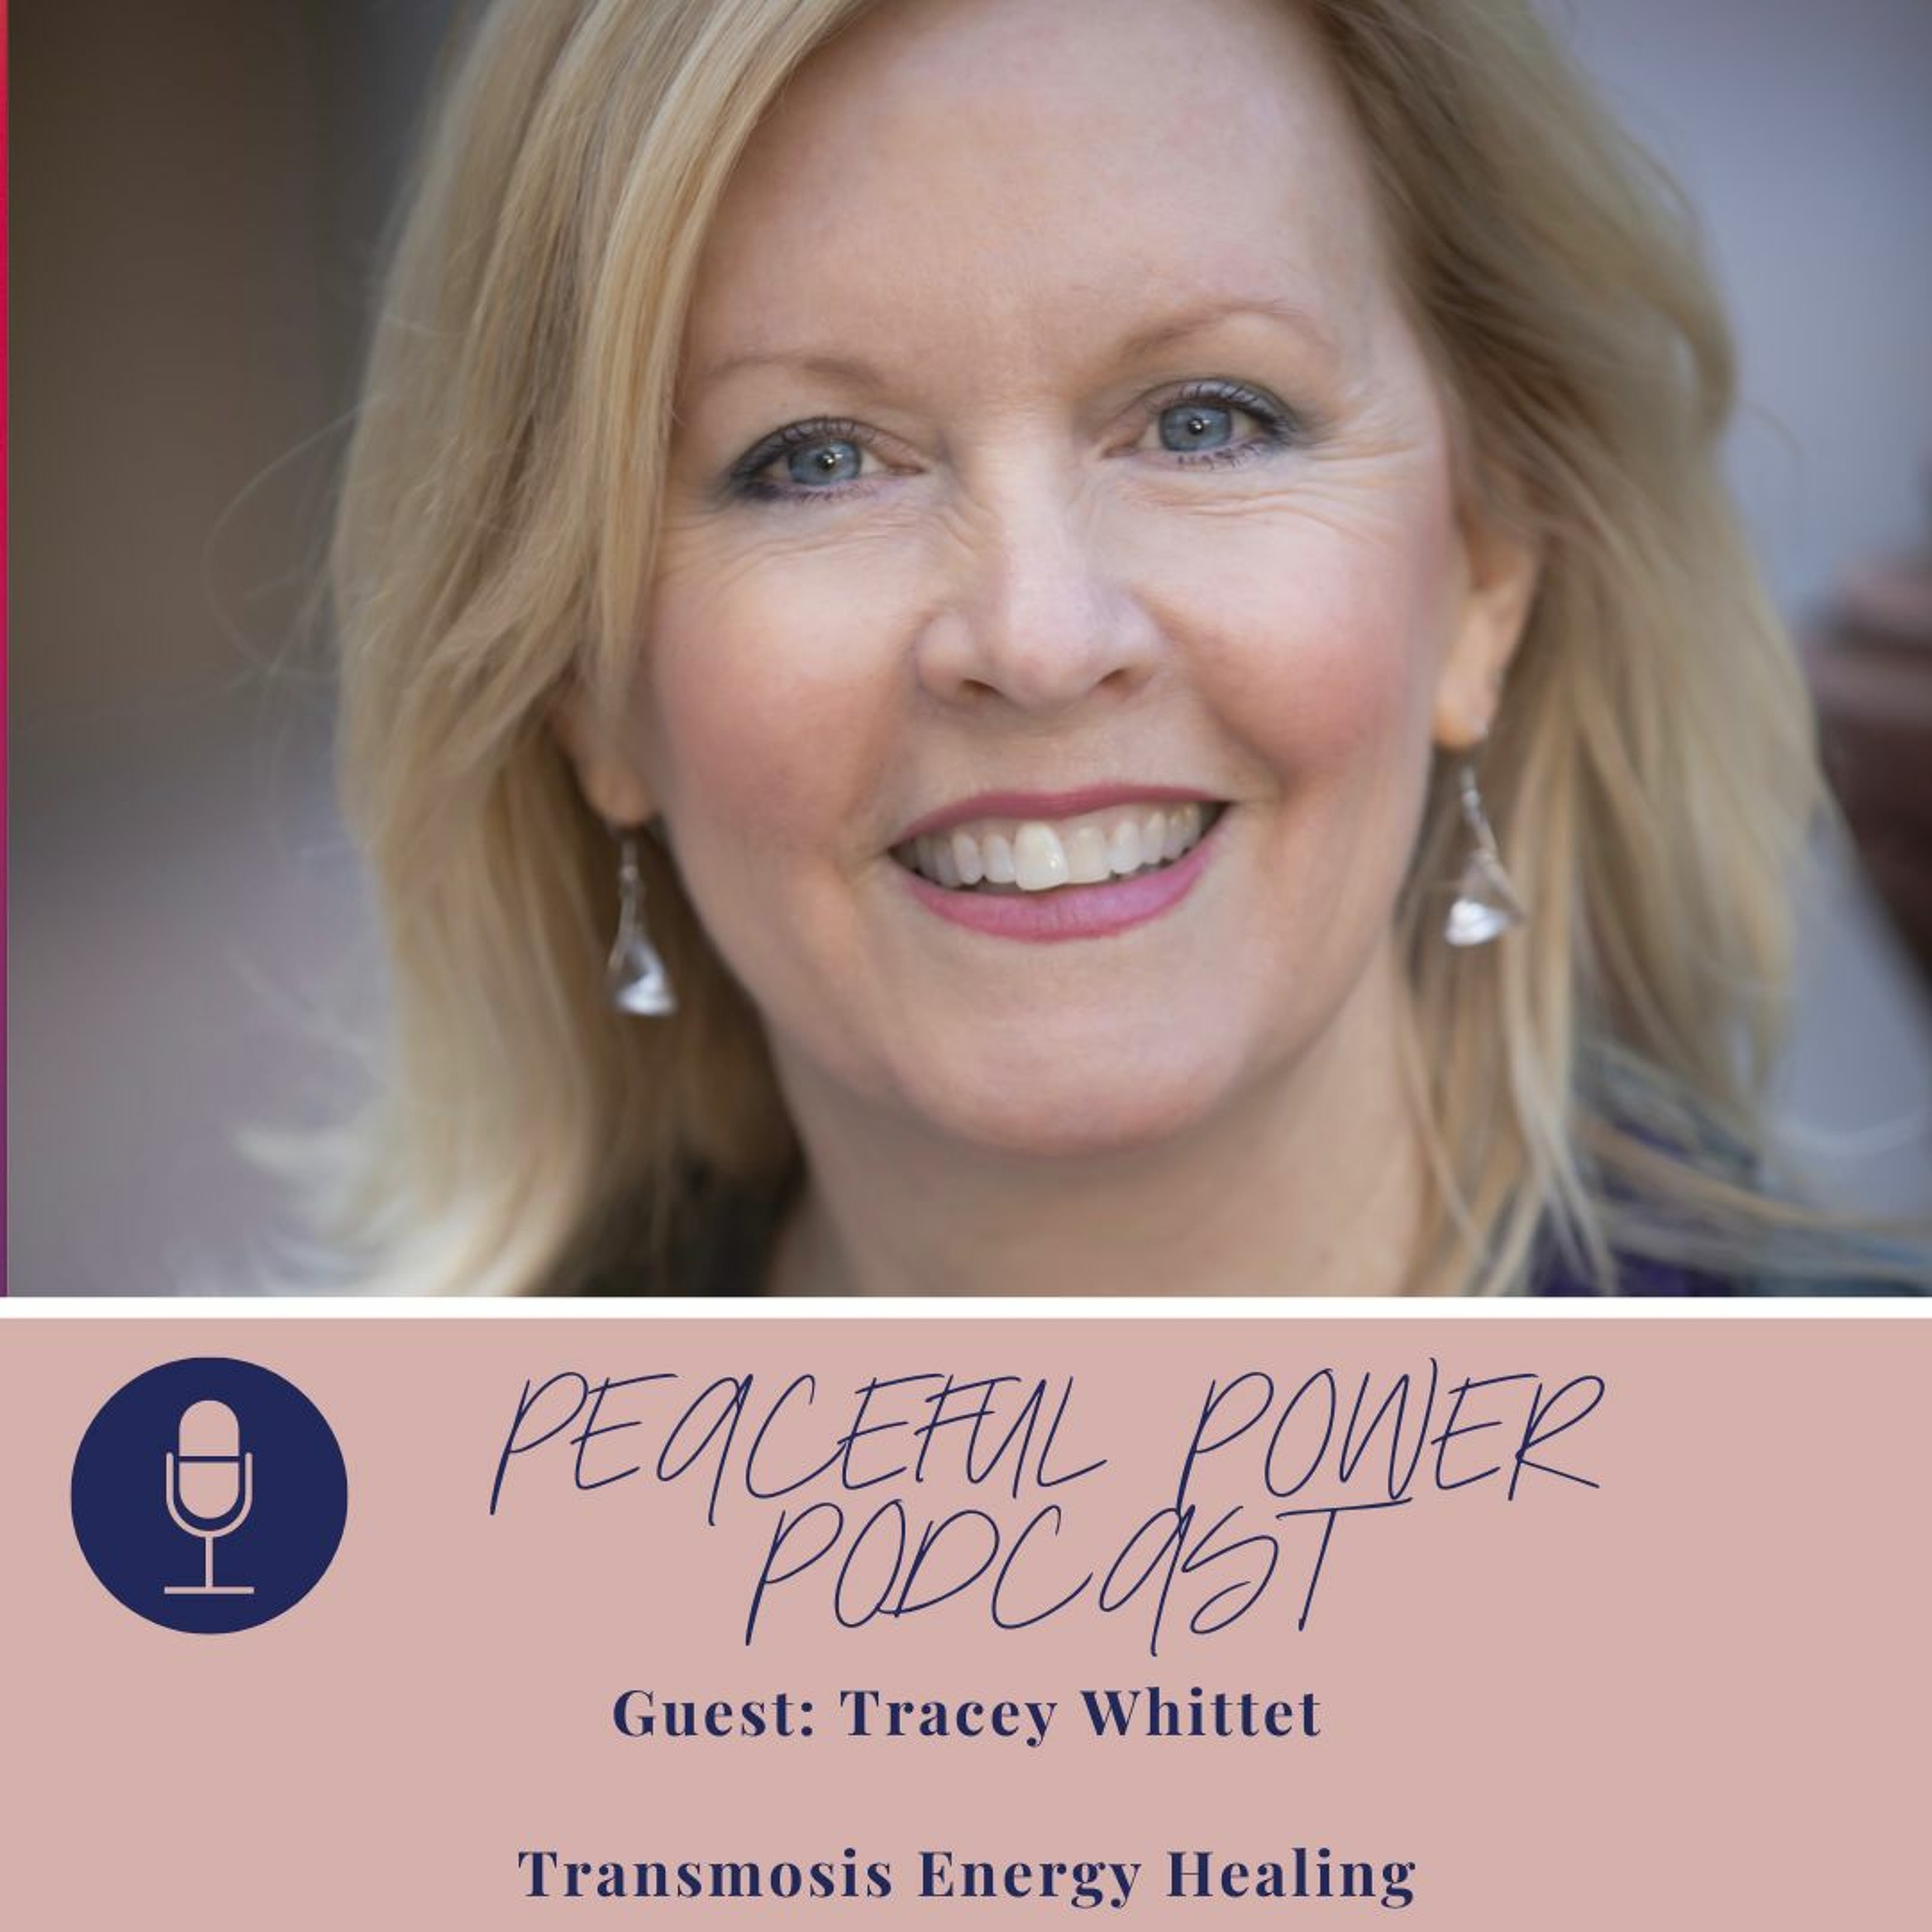 Tracey Whittet on Transmosis Energy Healing